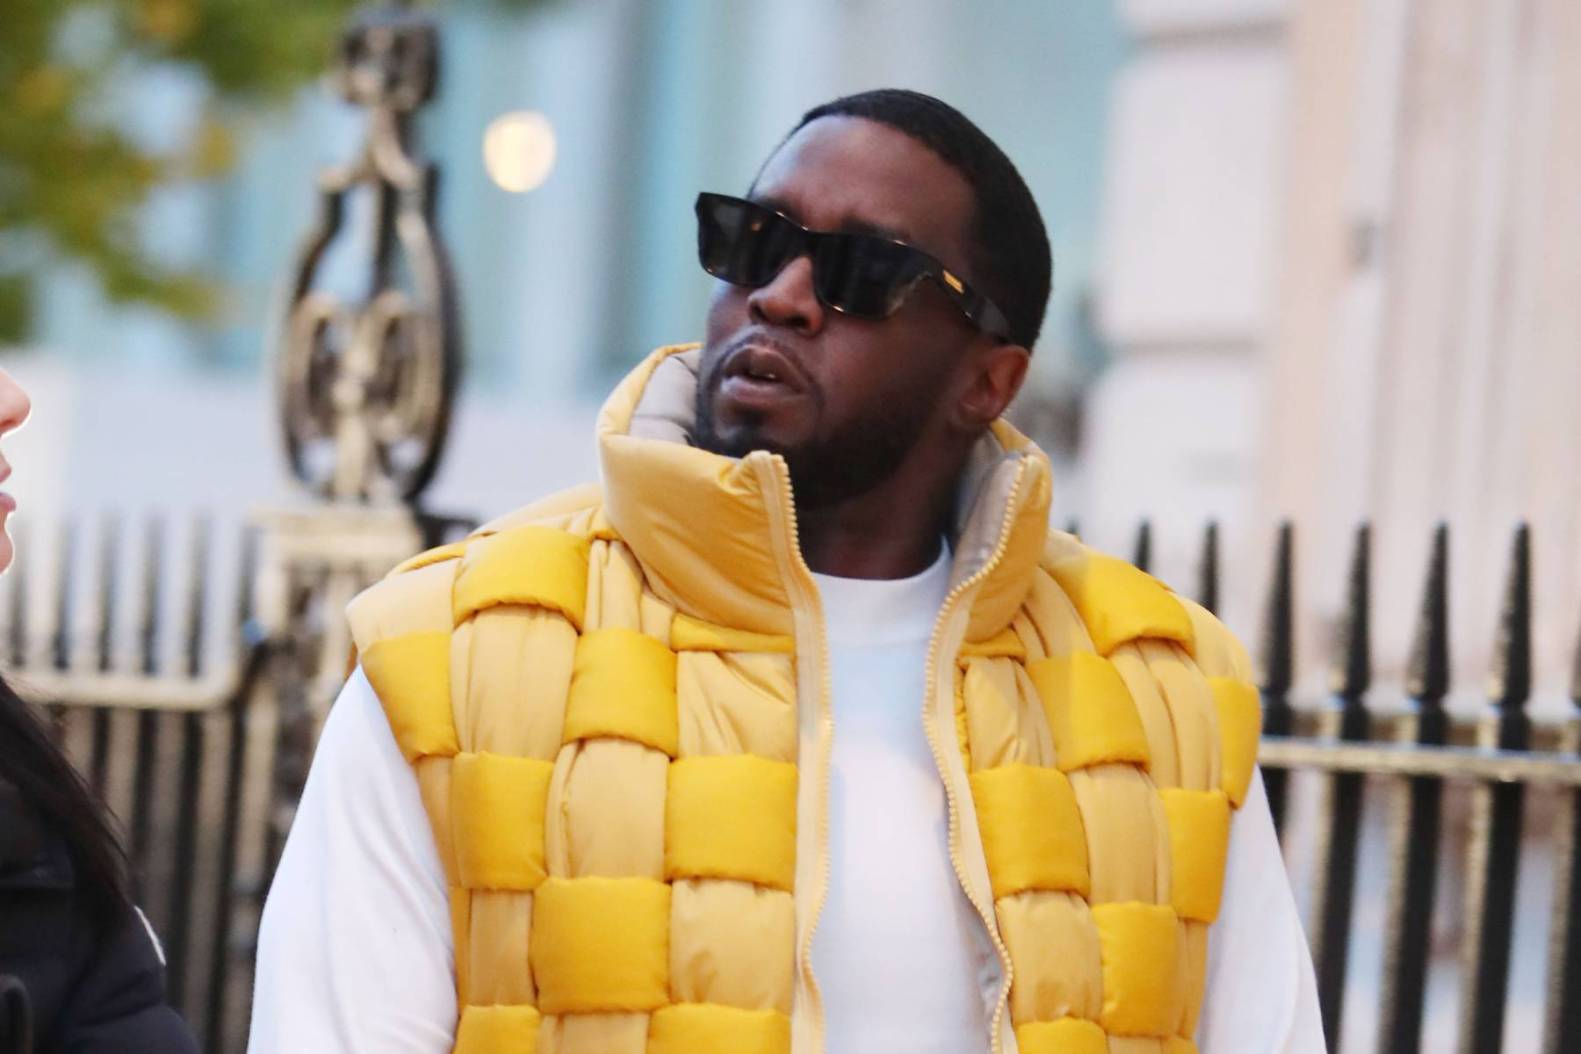 Music producer sues Sean Combs for sexual assault and harassment